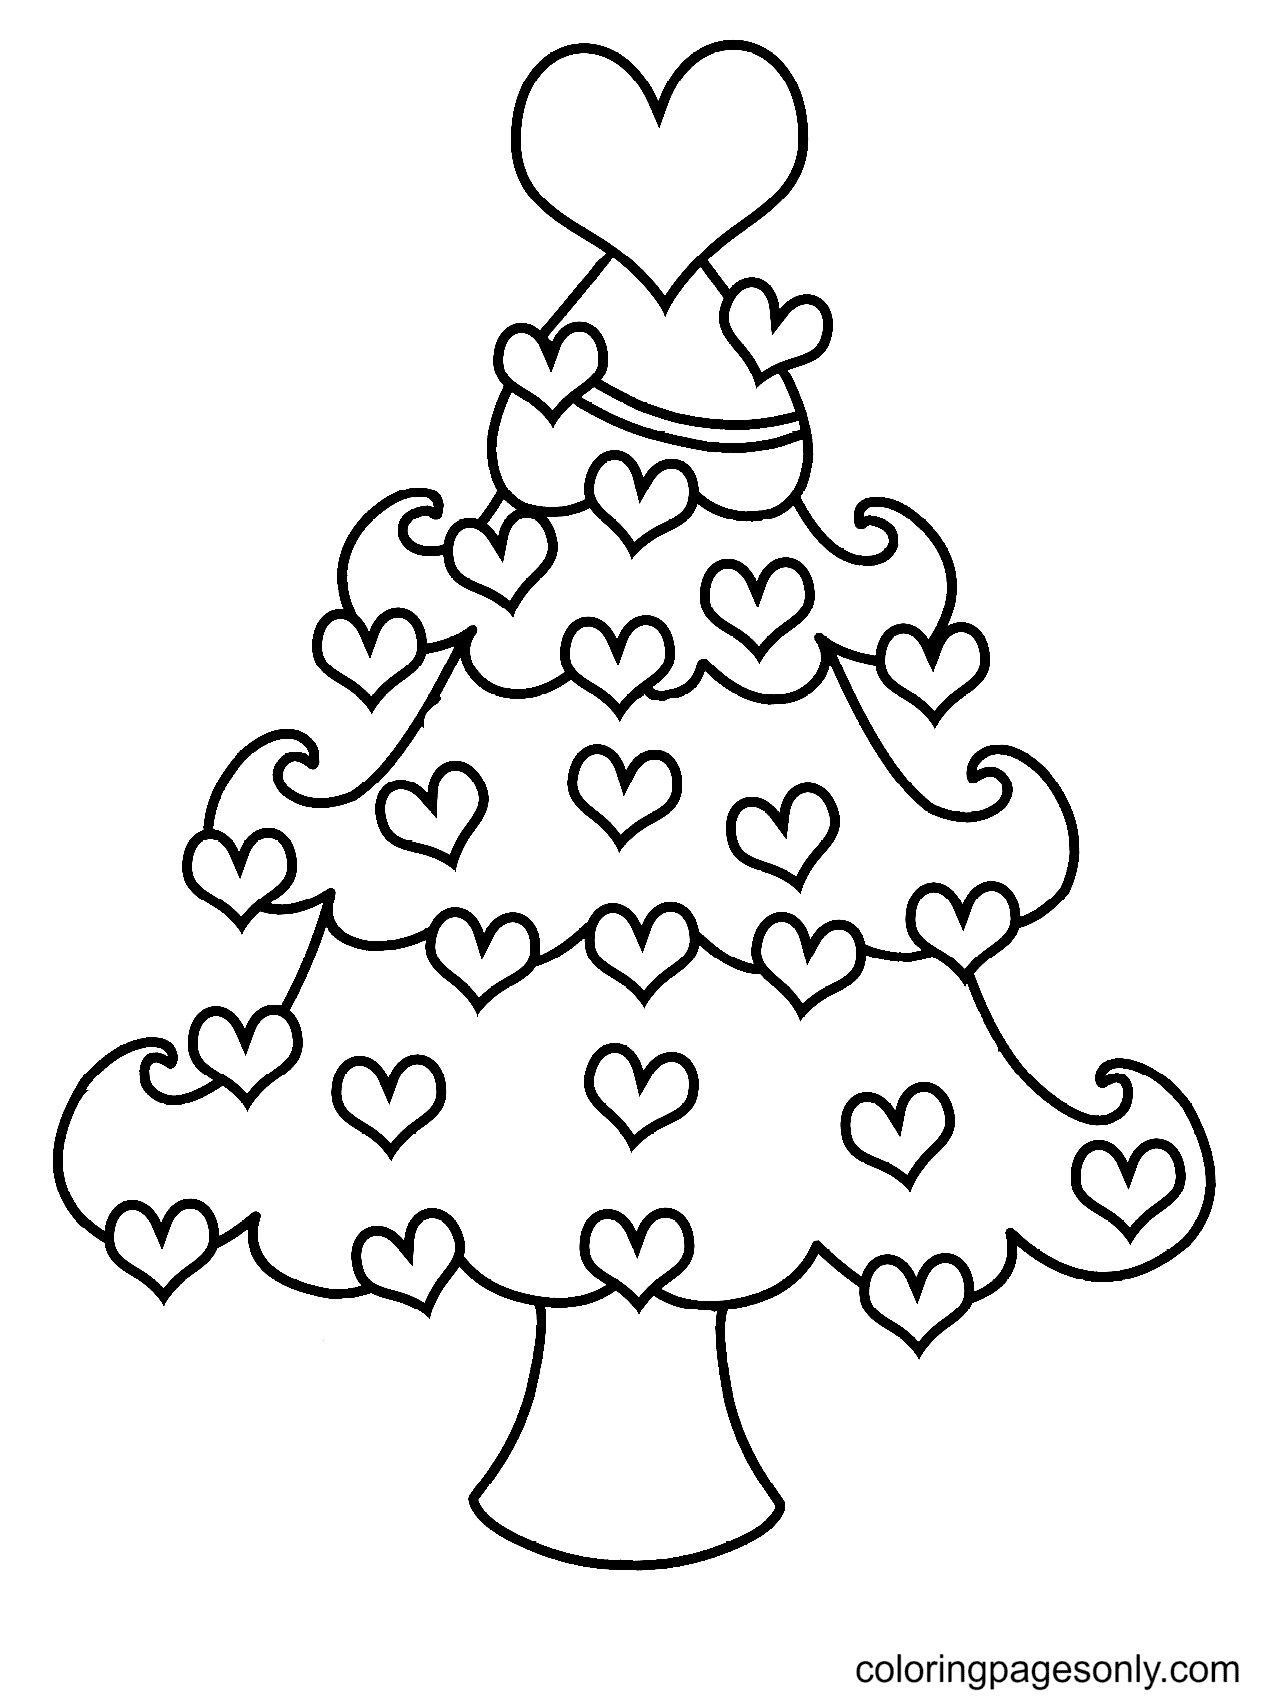 Heart Decorated Christmas Tree Coloring ...